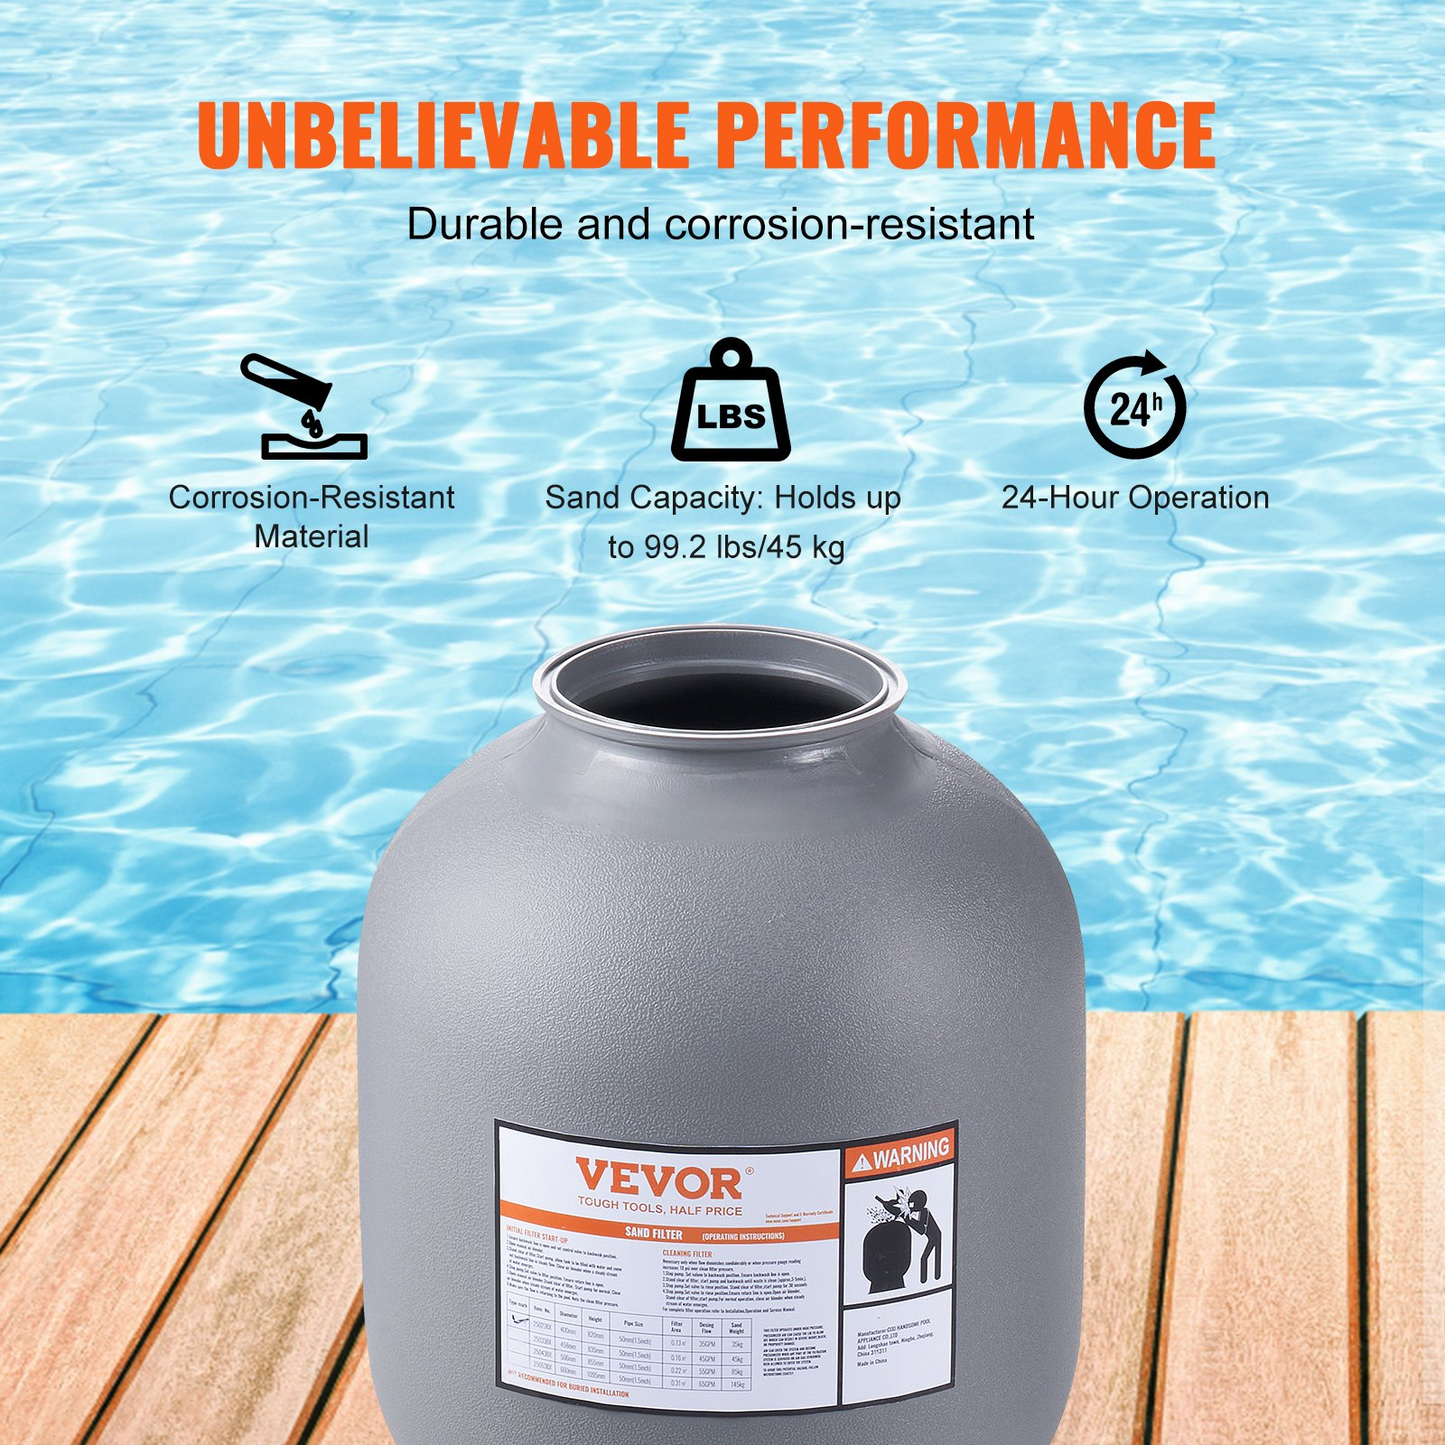 VEVOR Sand Filter, 19-inch, Up to 45 GPM Flow Rate, Above Inground Swimming Pool Sand Filter System with 7-Way Multi-Port Valve, Filter, Backwash, Rinse, Recirculate, Waste, Winter, Closed Functions, Goodies N Stuff